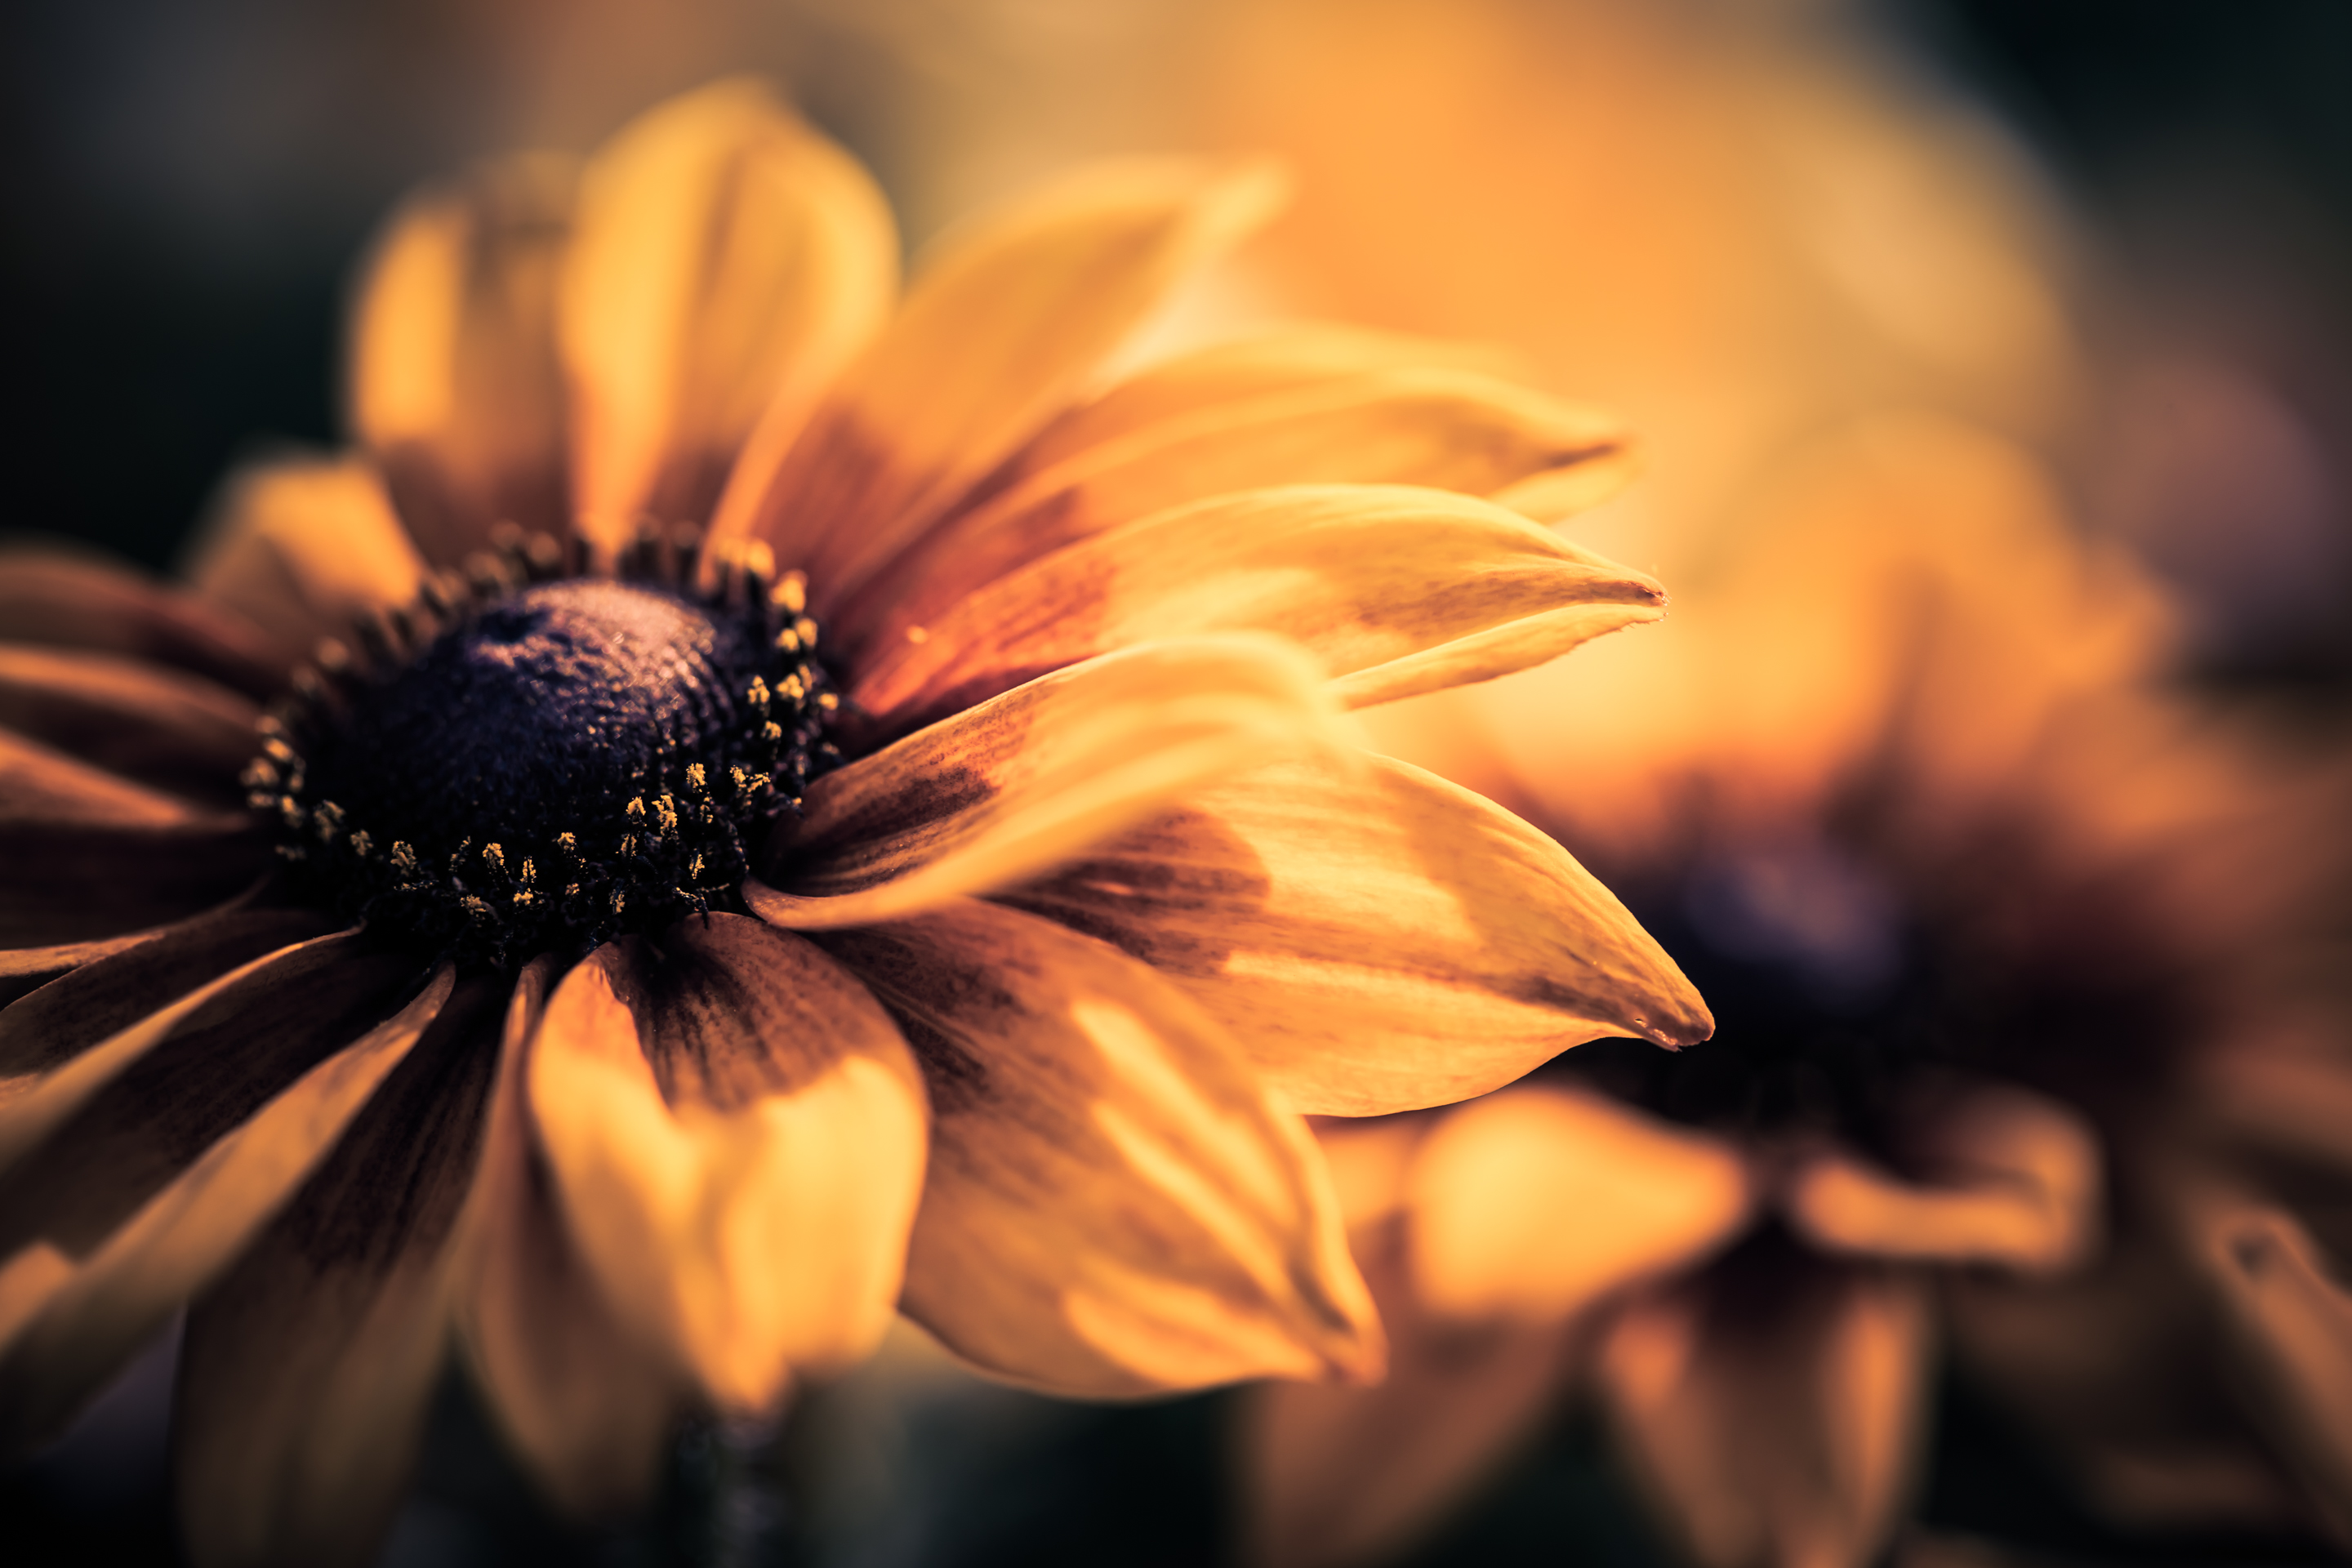 Black-eyed Susan macro photo with bokeh and shallow depth of field.